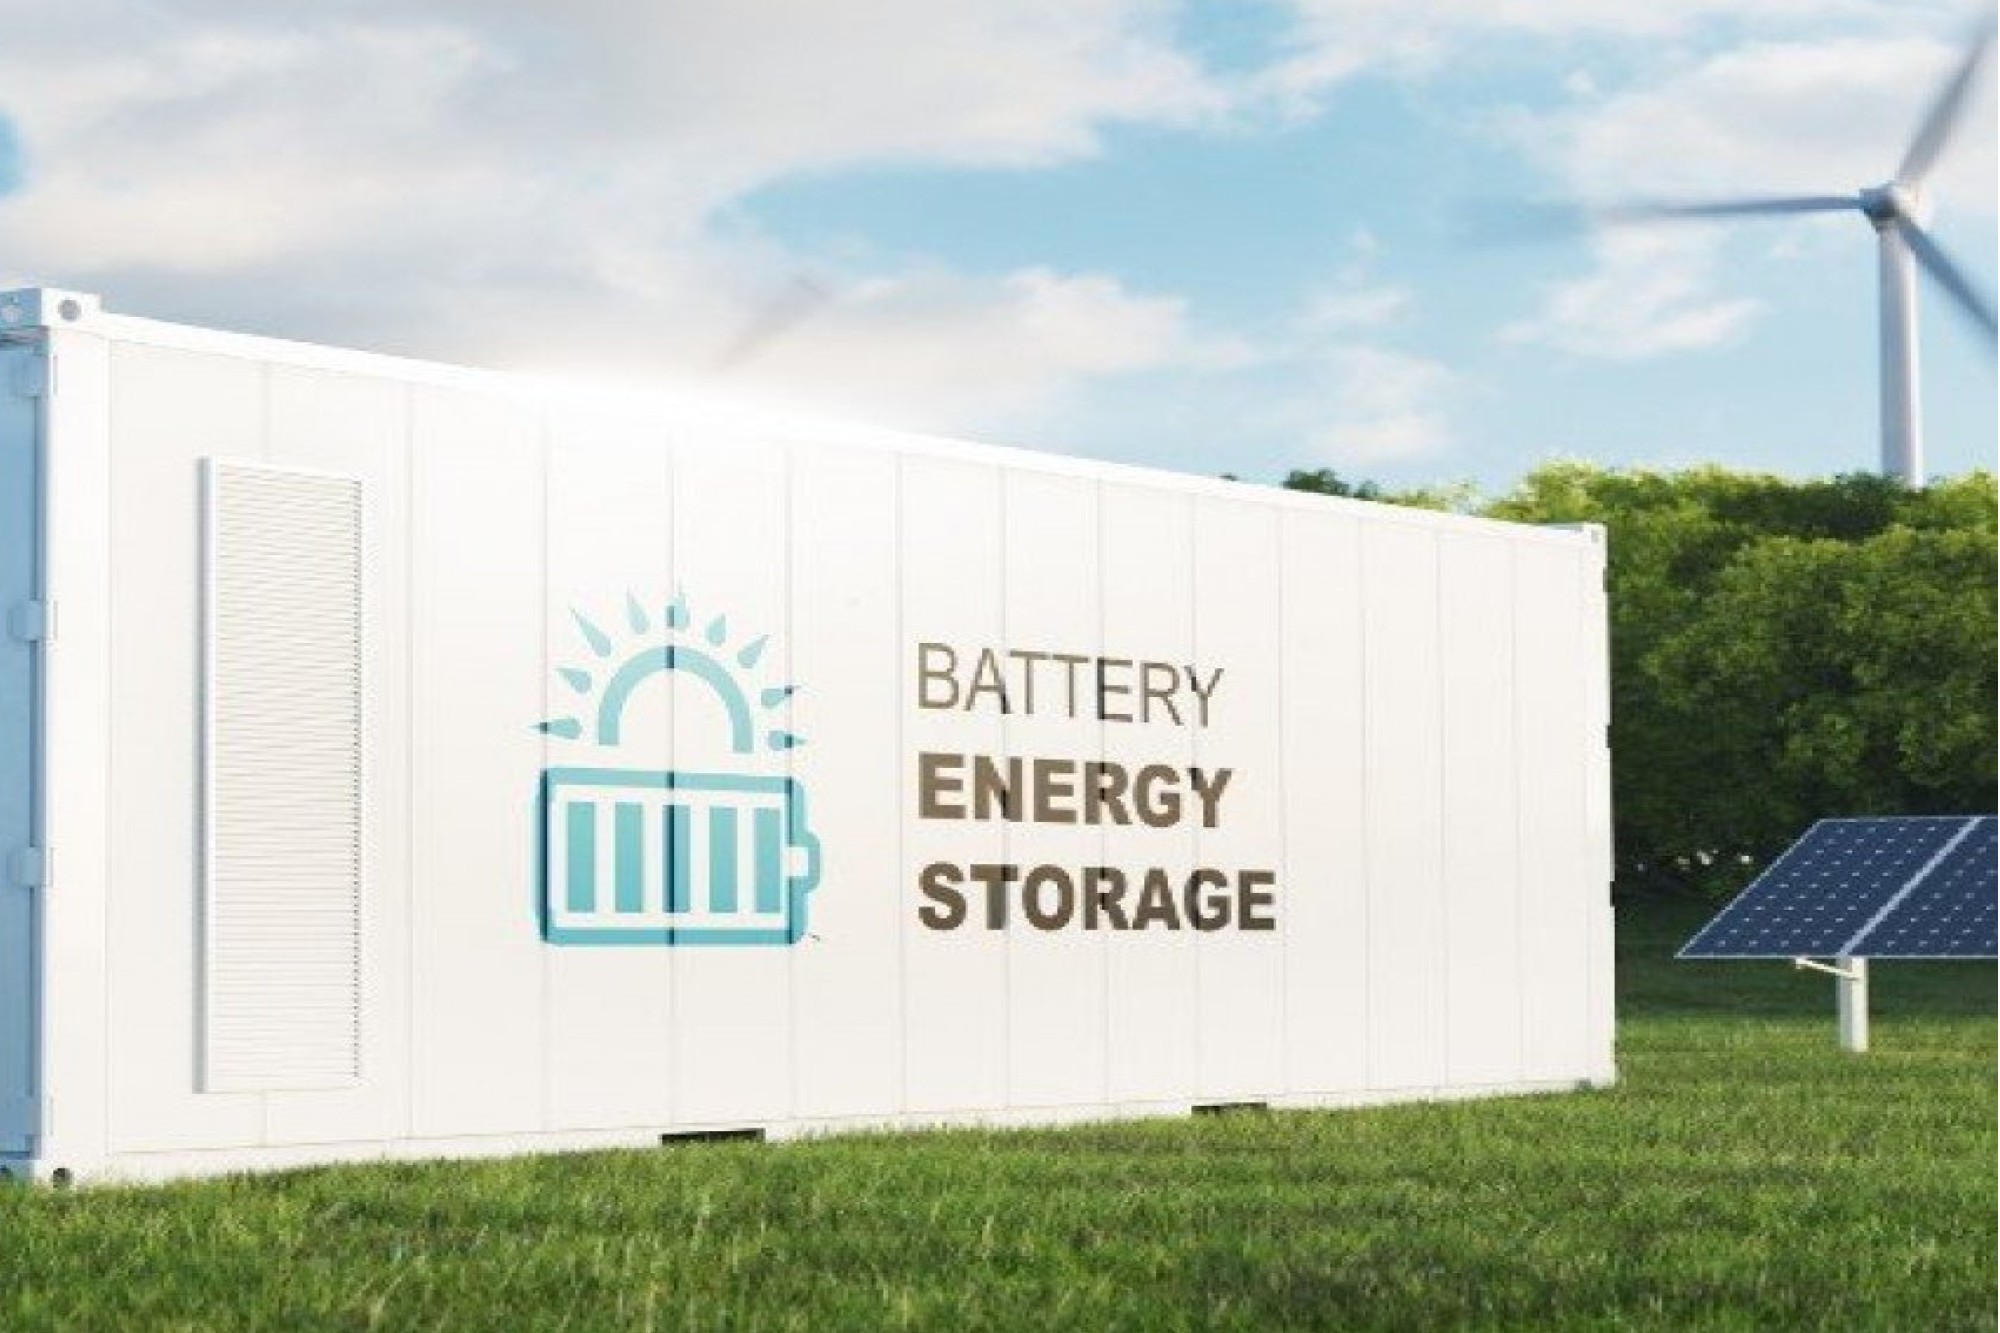 Serentica invites EoI for 800 MWh standalone battery energy storage